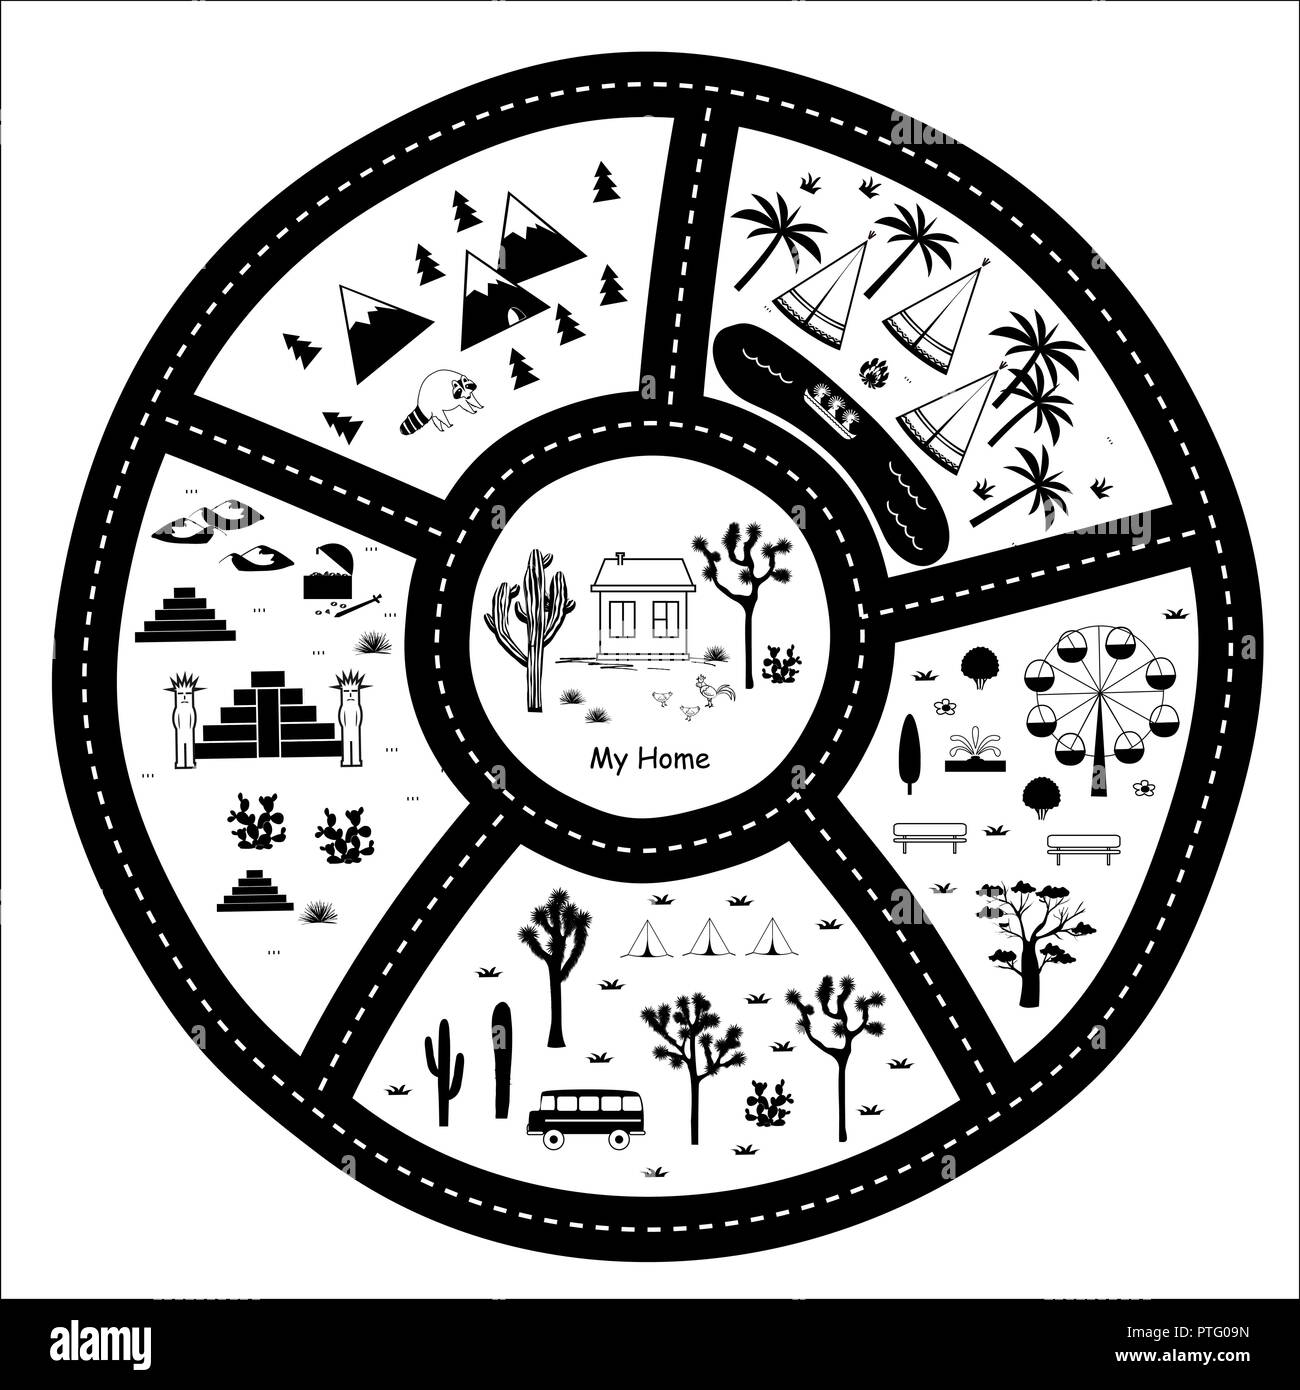 Road, Mountains and Woods Adventure Map. Kids round play carpet or poster with native americans tribal elements. Trendy black and white Scandinavian S Stock Vector